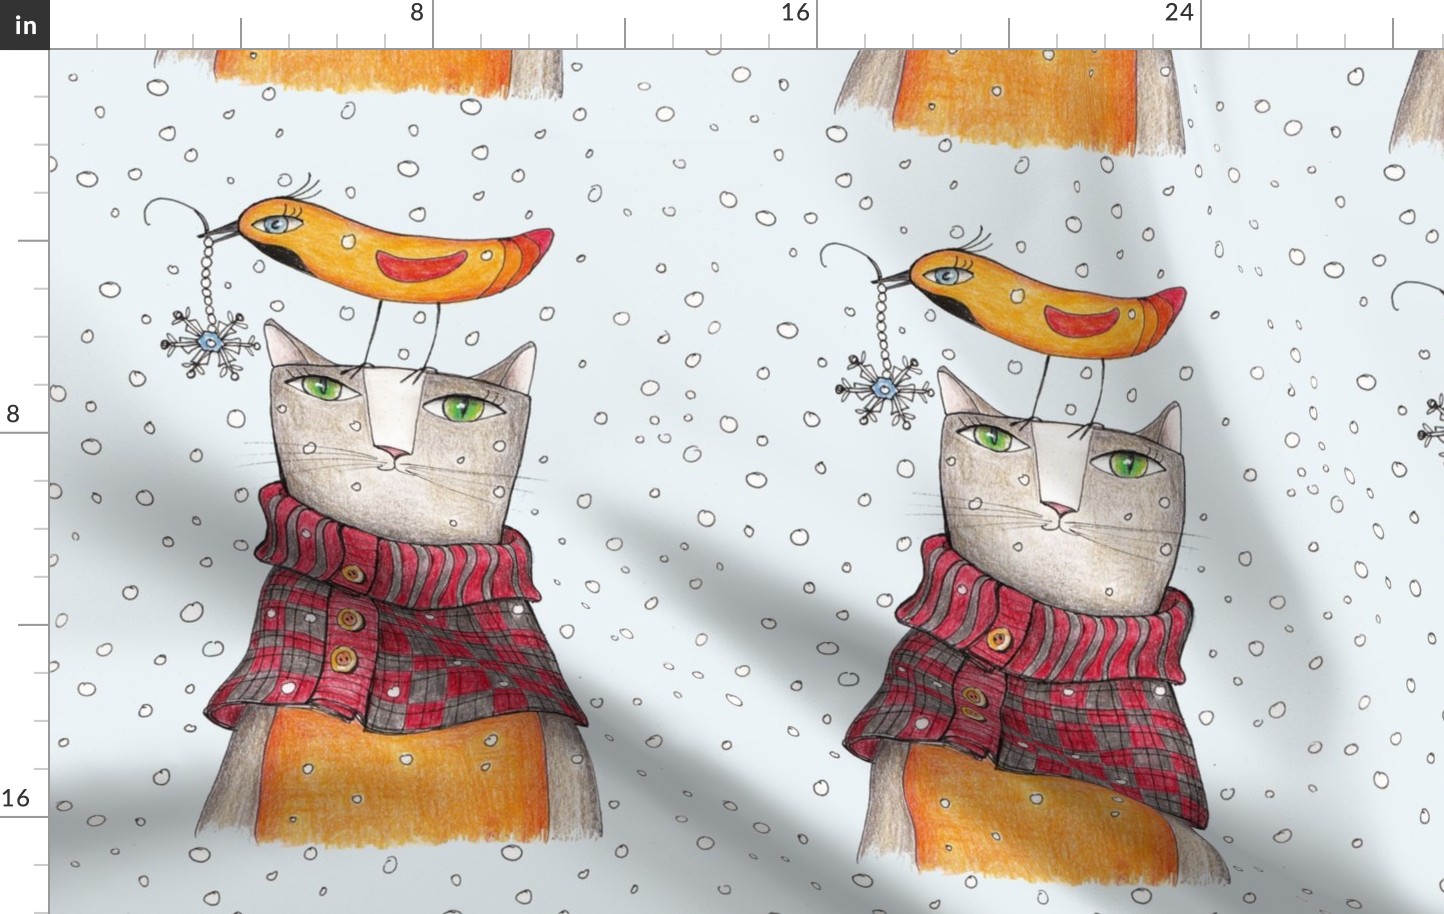 Red sweater cat -  Large scale